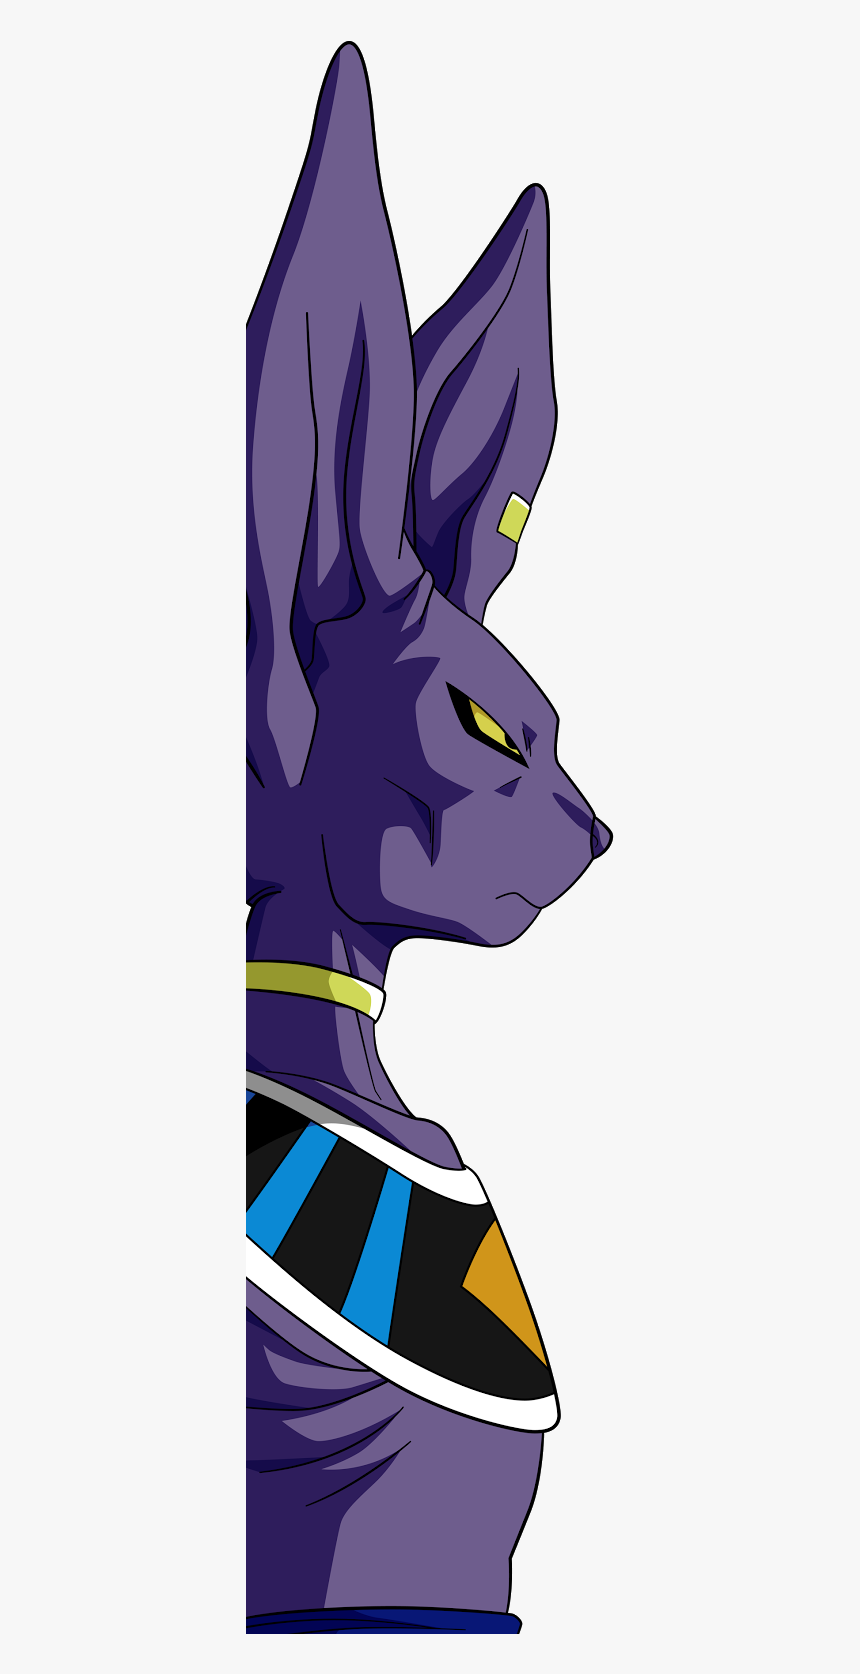 Lord Beerus Wallpapers - Wallpaper Cave